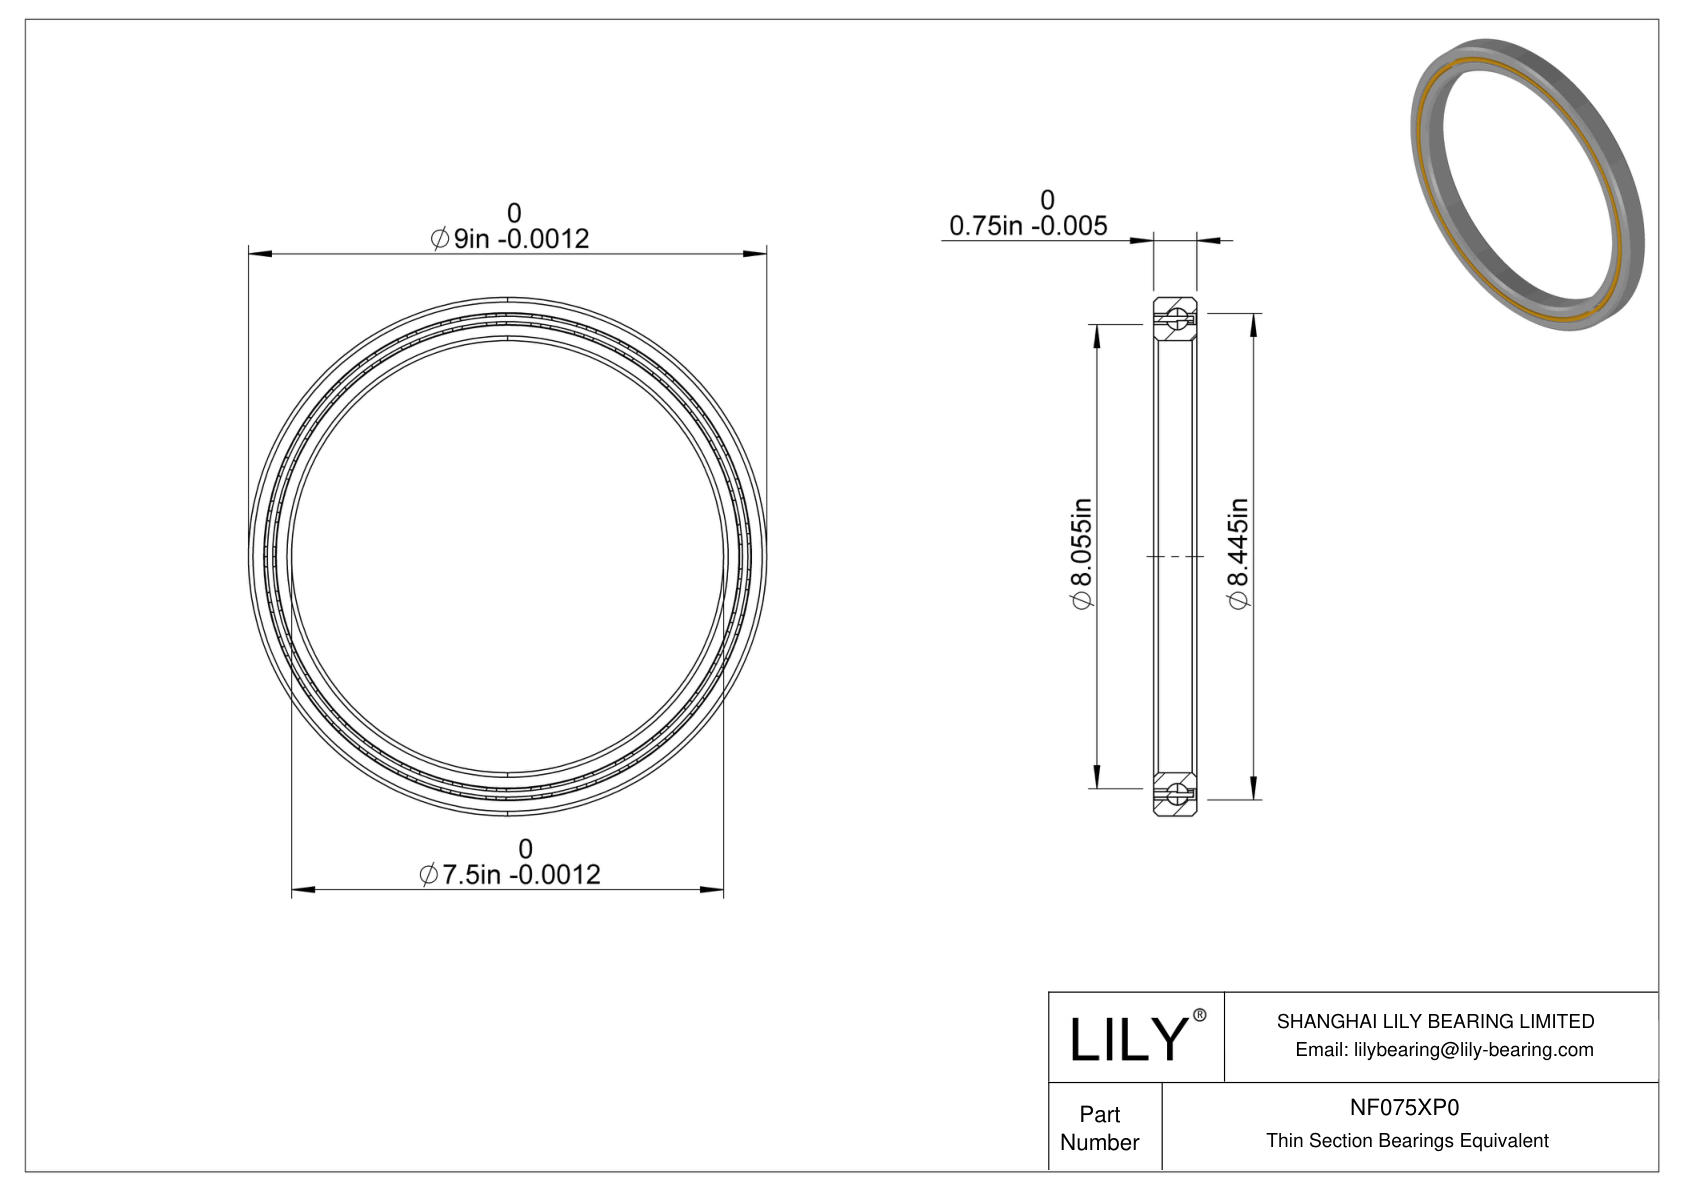 NF075XP0 Constant Section (CS) Bearings cad drawing